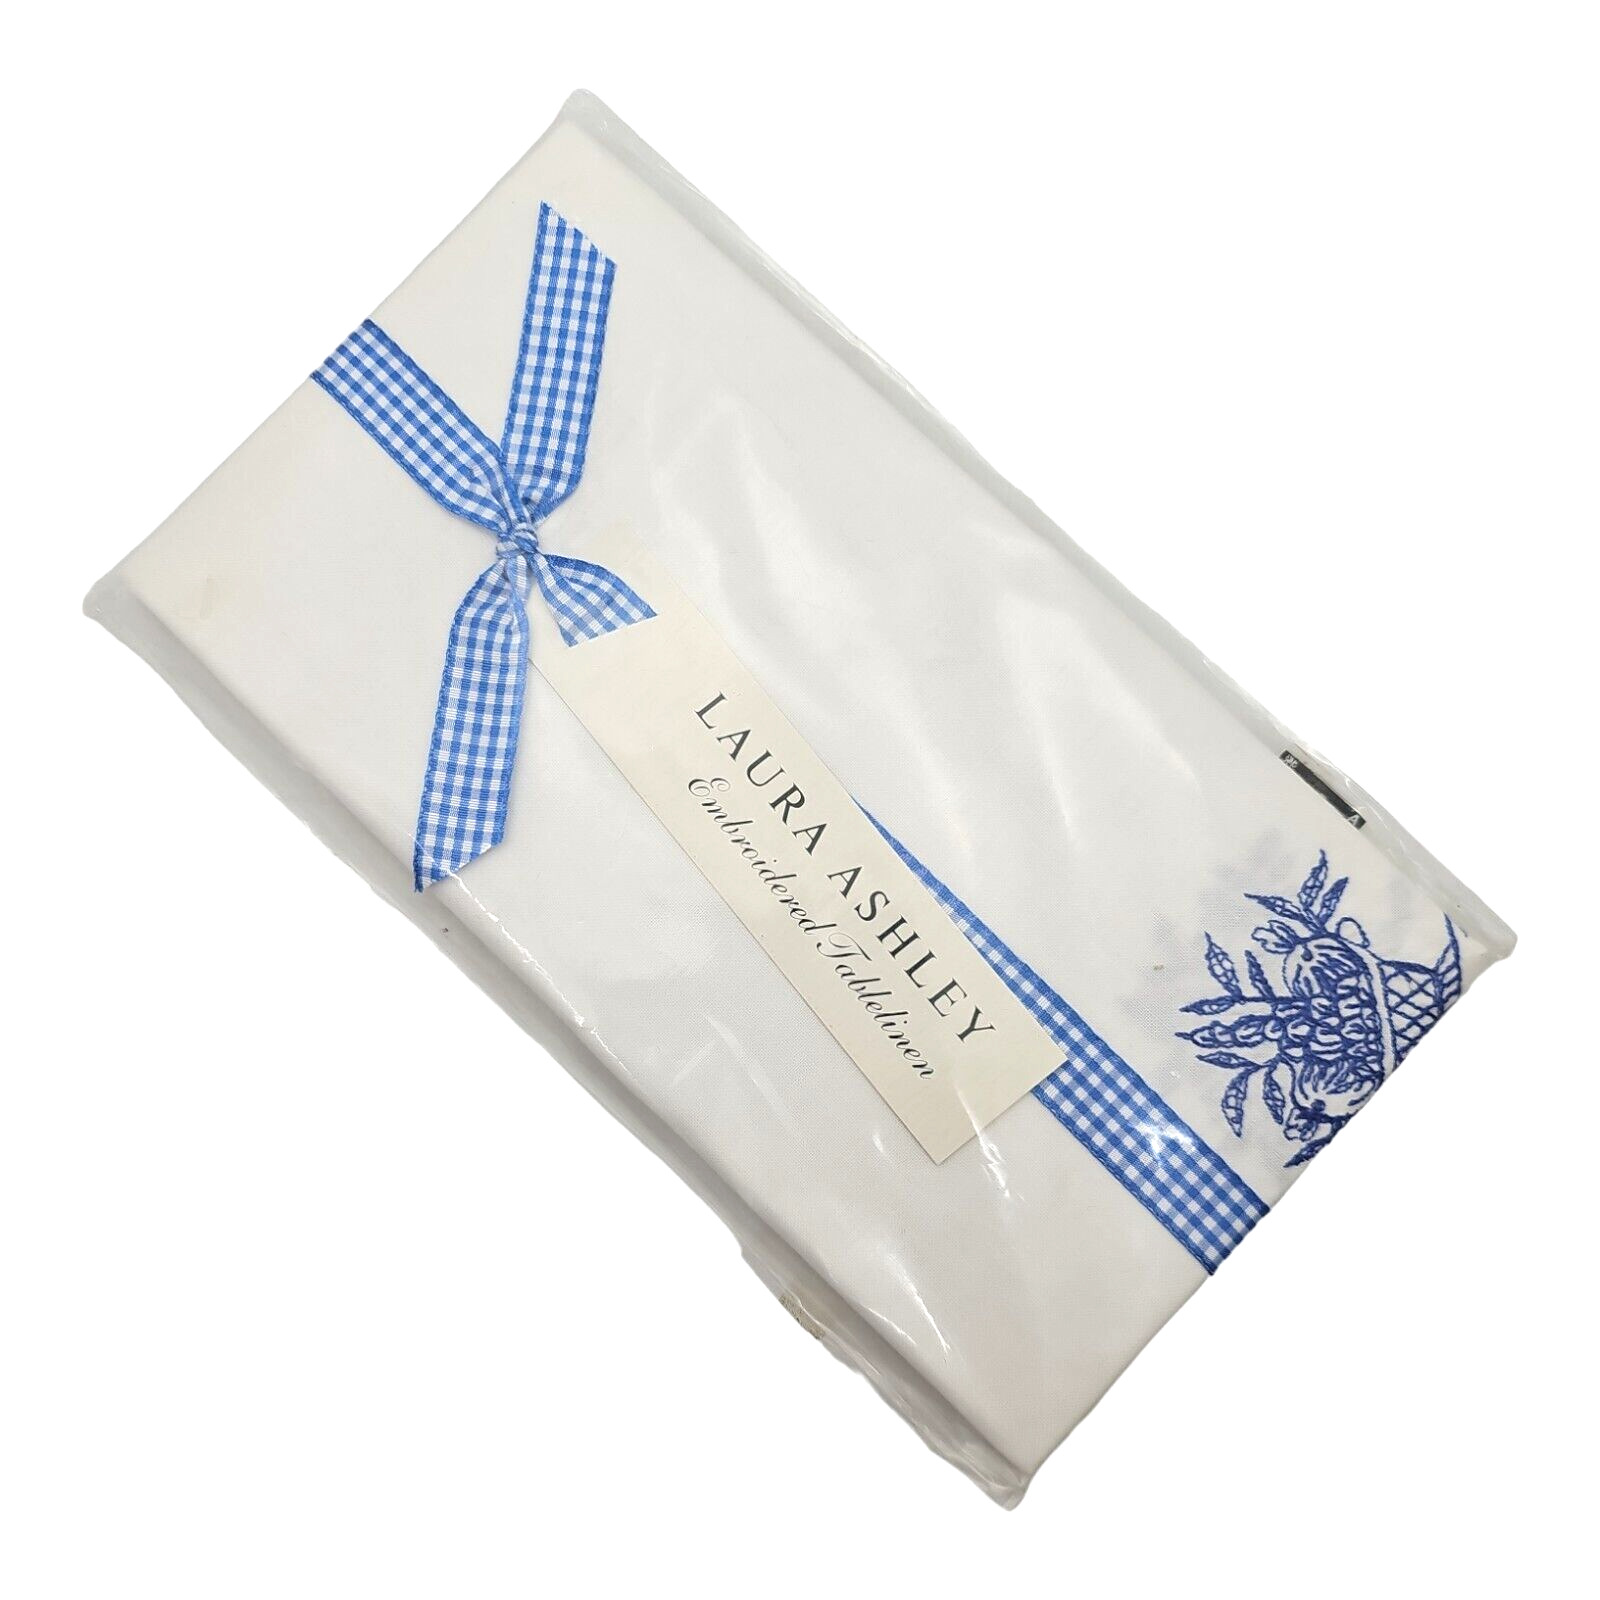 Laura Ashley Napkins 2 Embroidered 17x17 in White Blue Basket Cotton Tablelinen